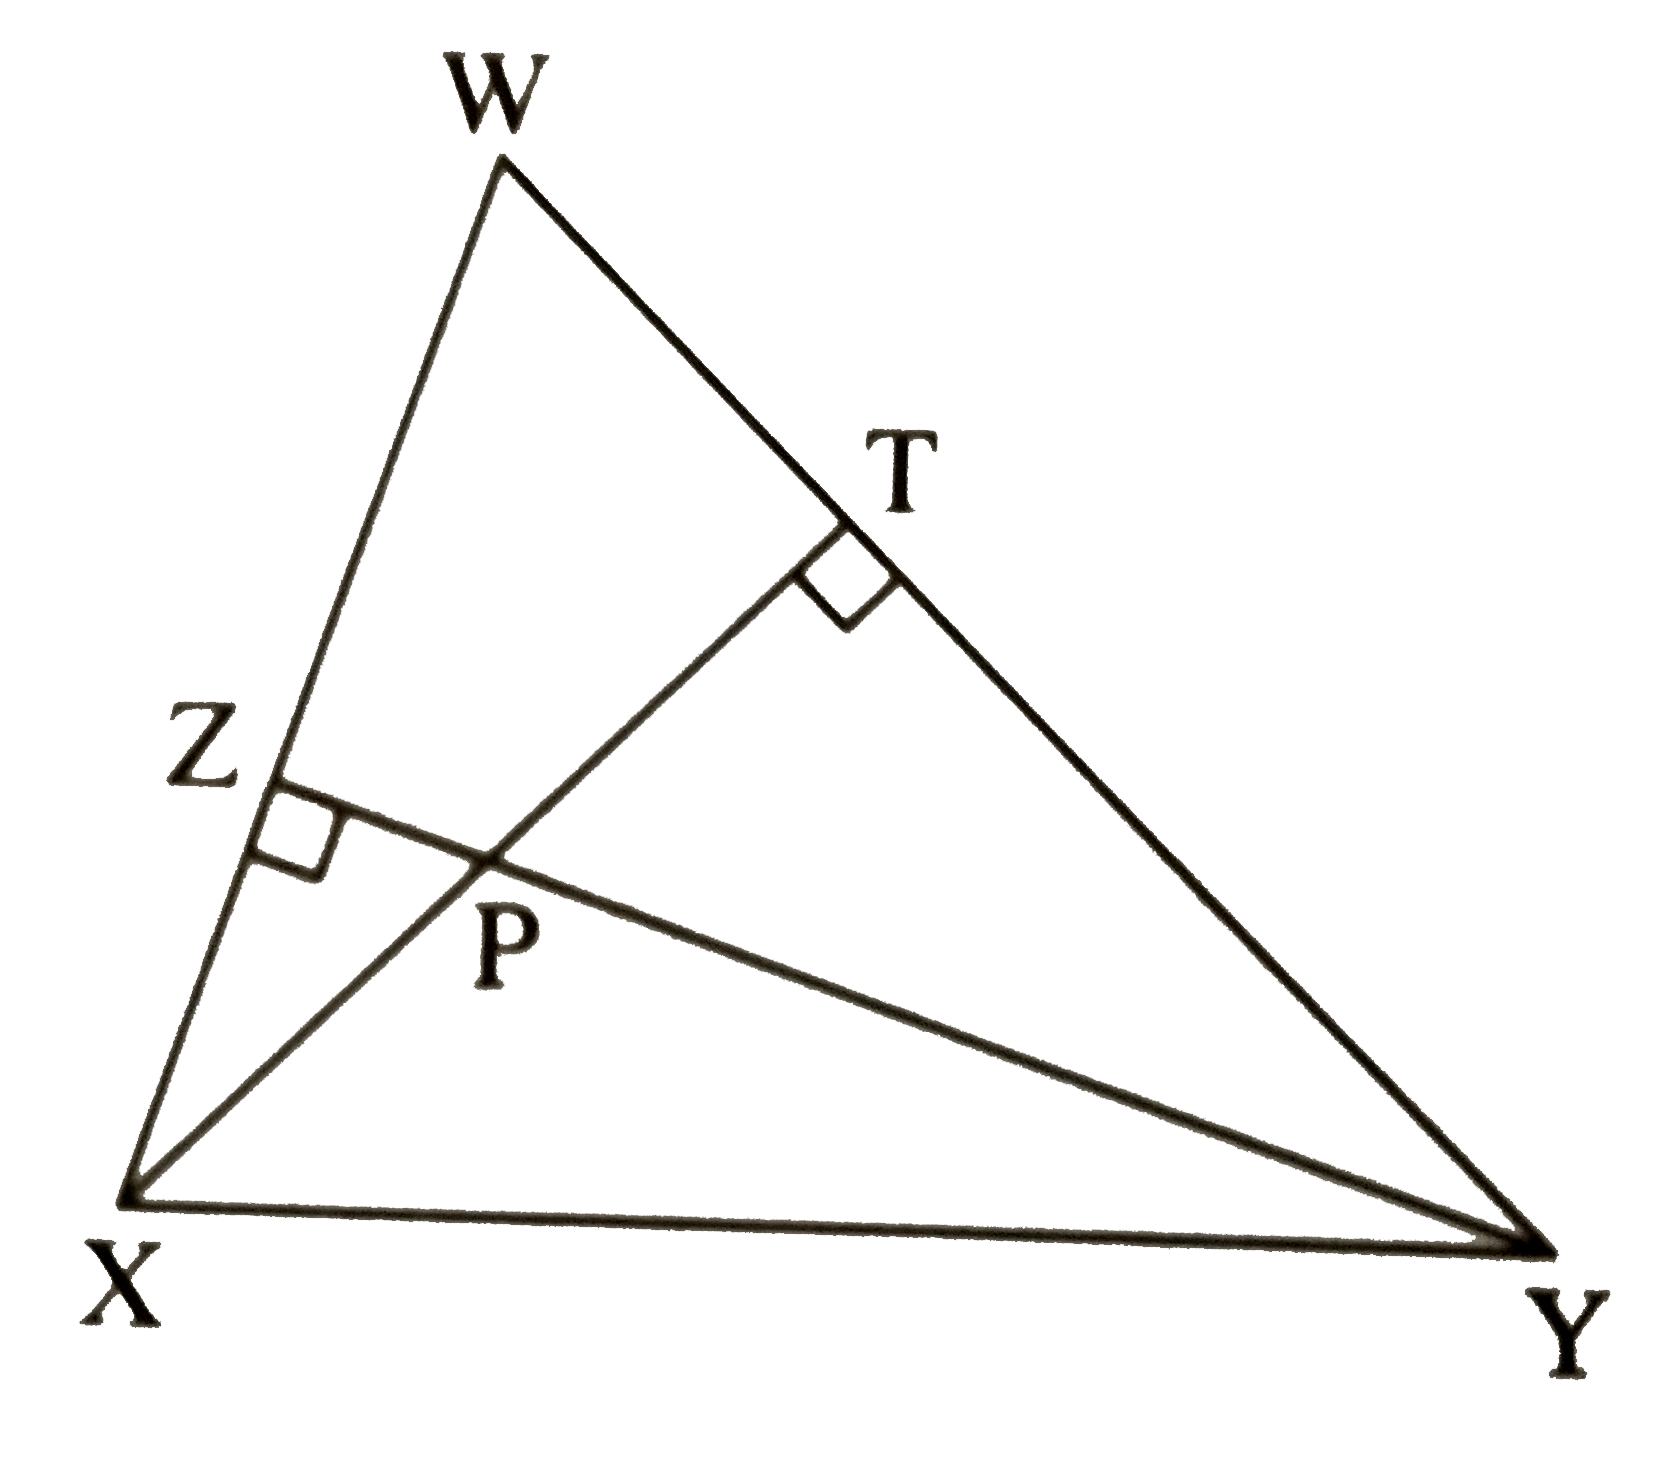 In figure, altitudes YZ and XT of triangle WXY intersect  at P. Prove that   square WZPT is cyclic